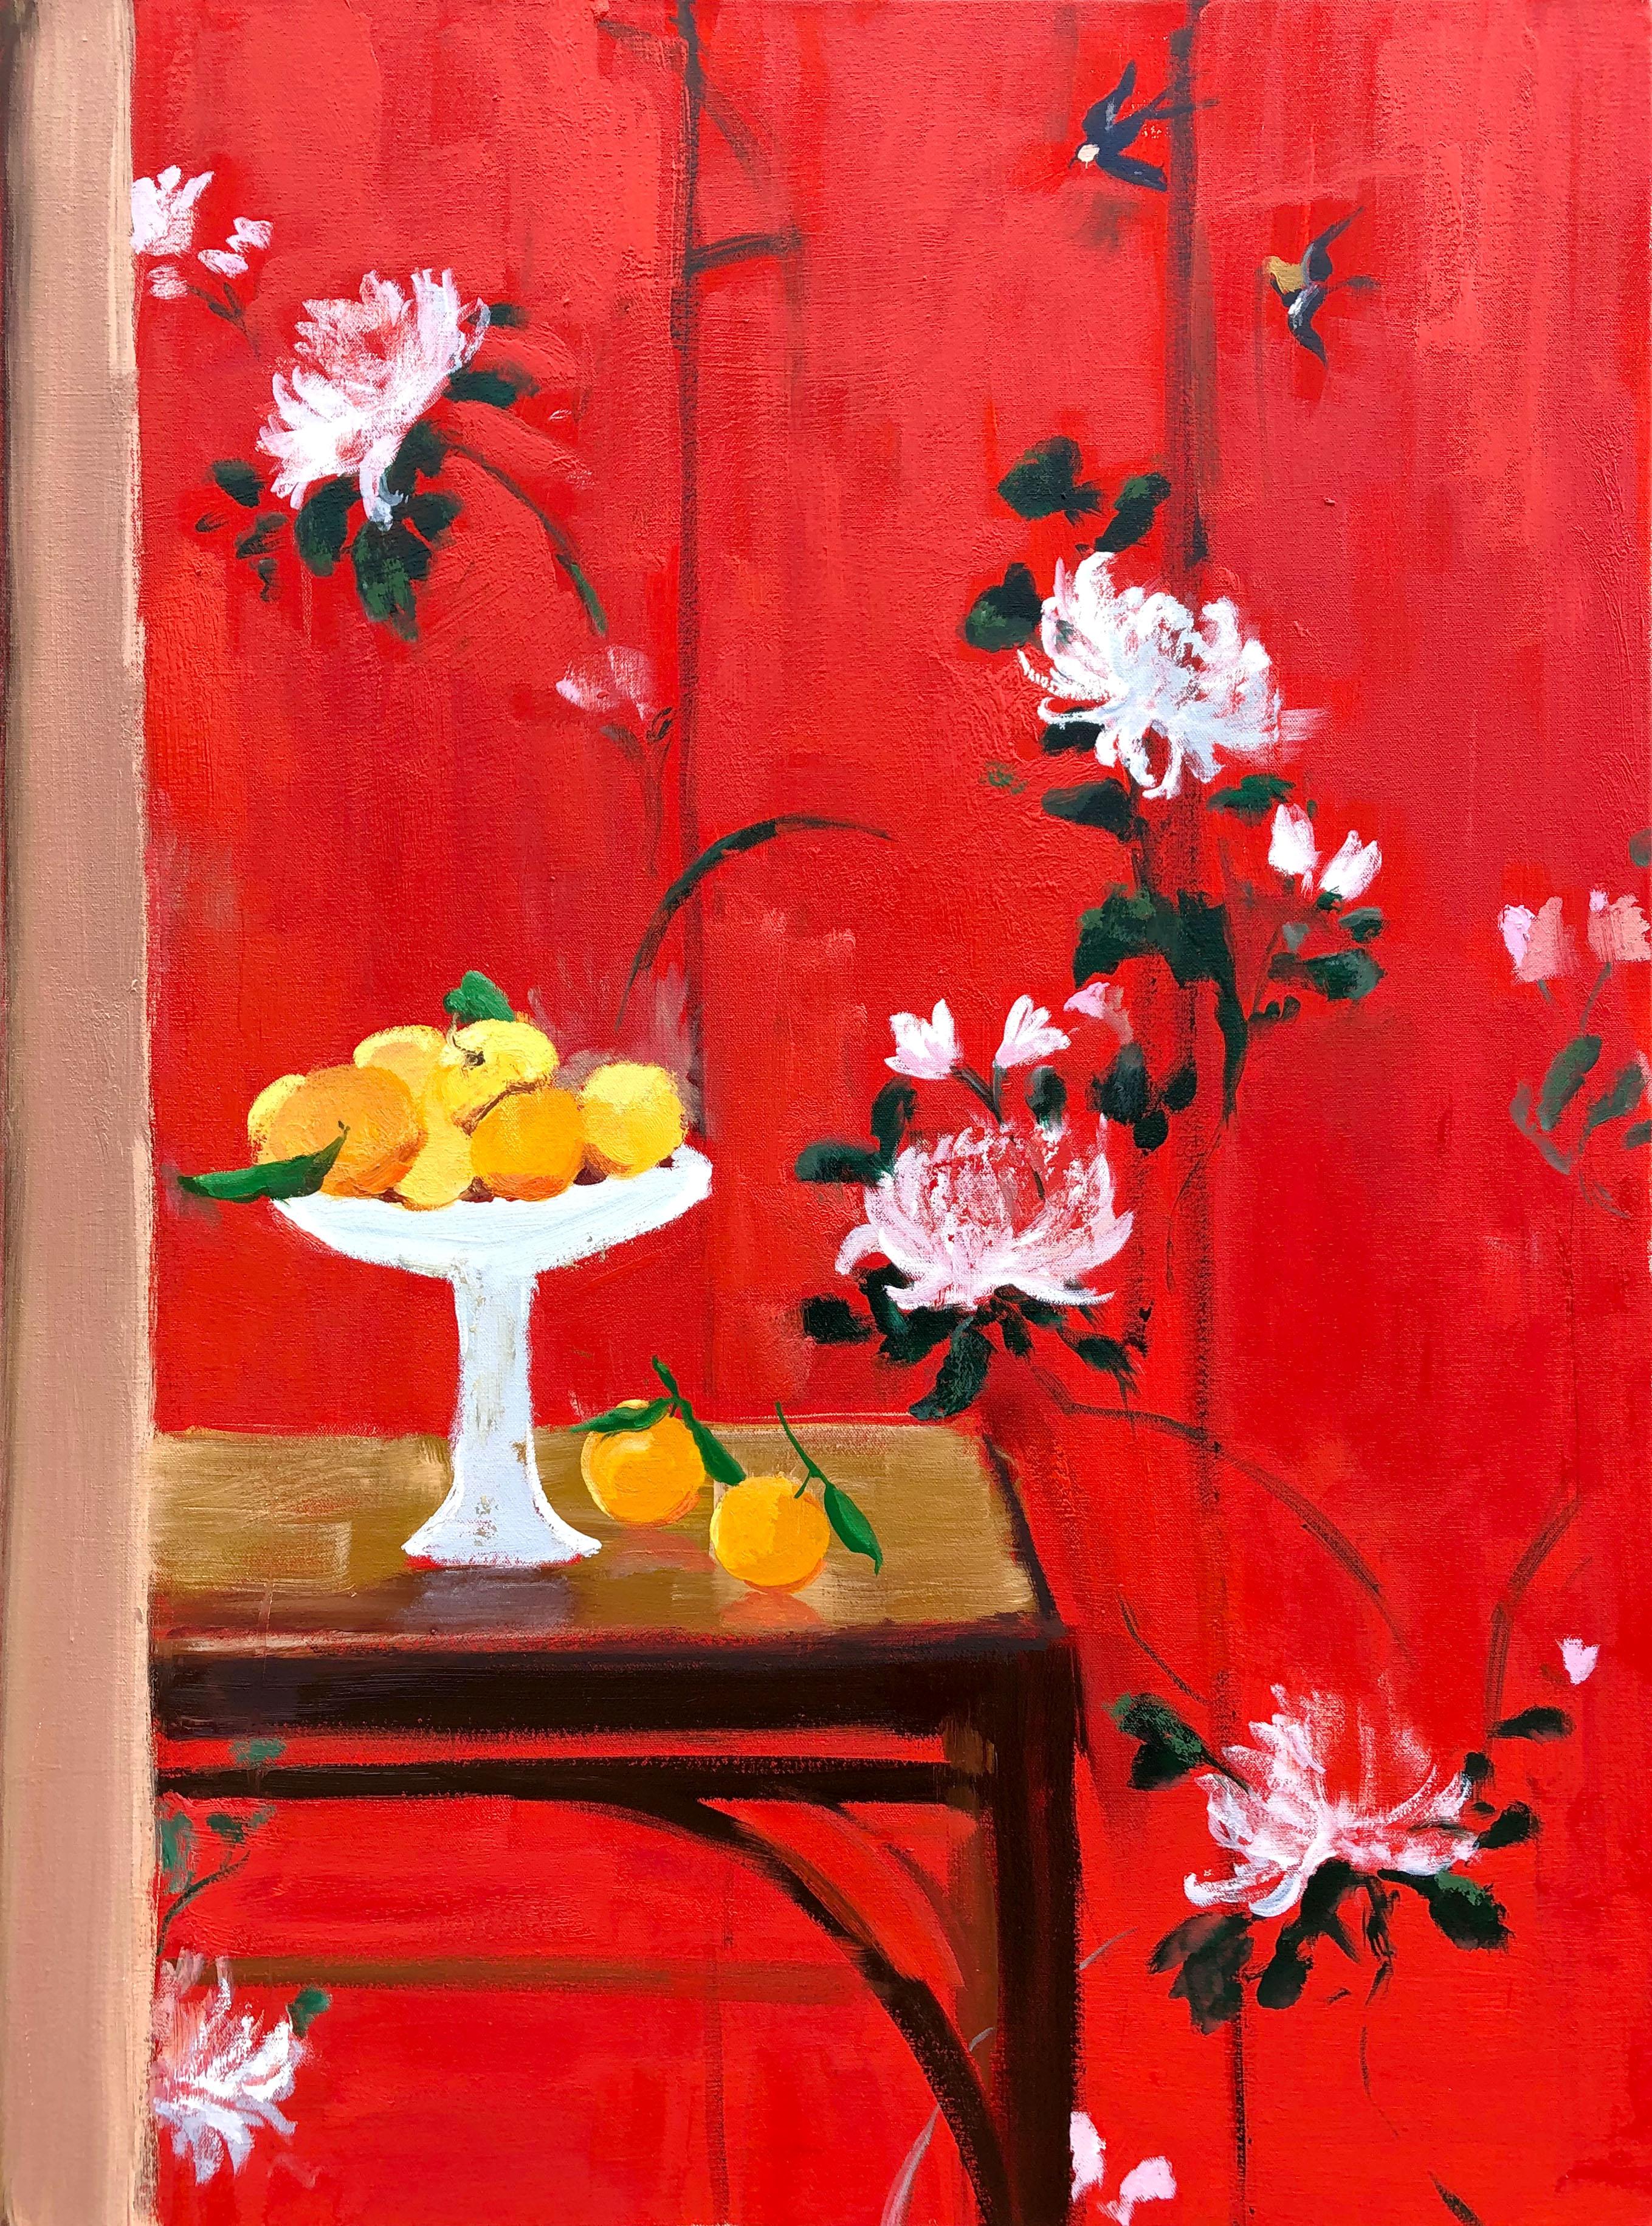 Orange Spice, Bright Red Vertical Still Life with Fruits and White Flowers